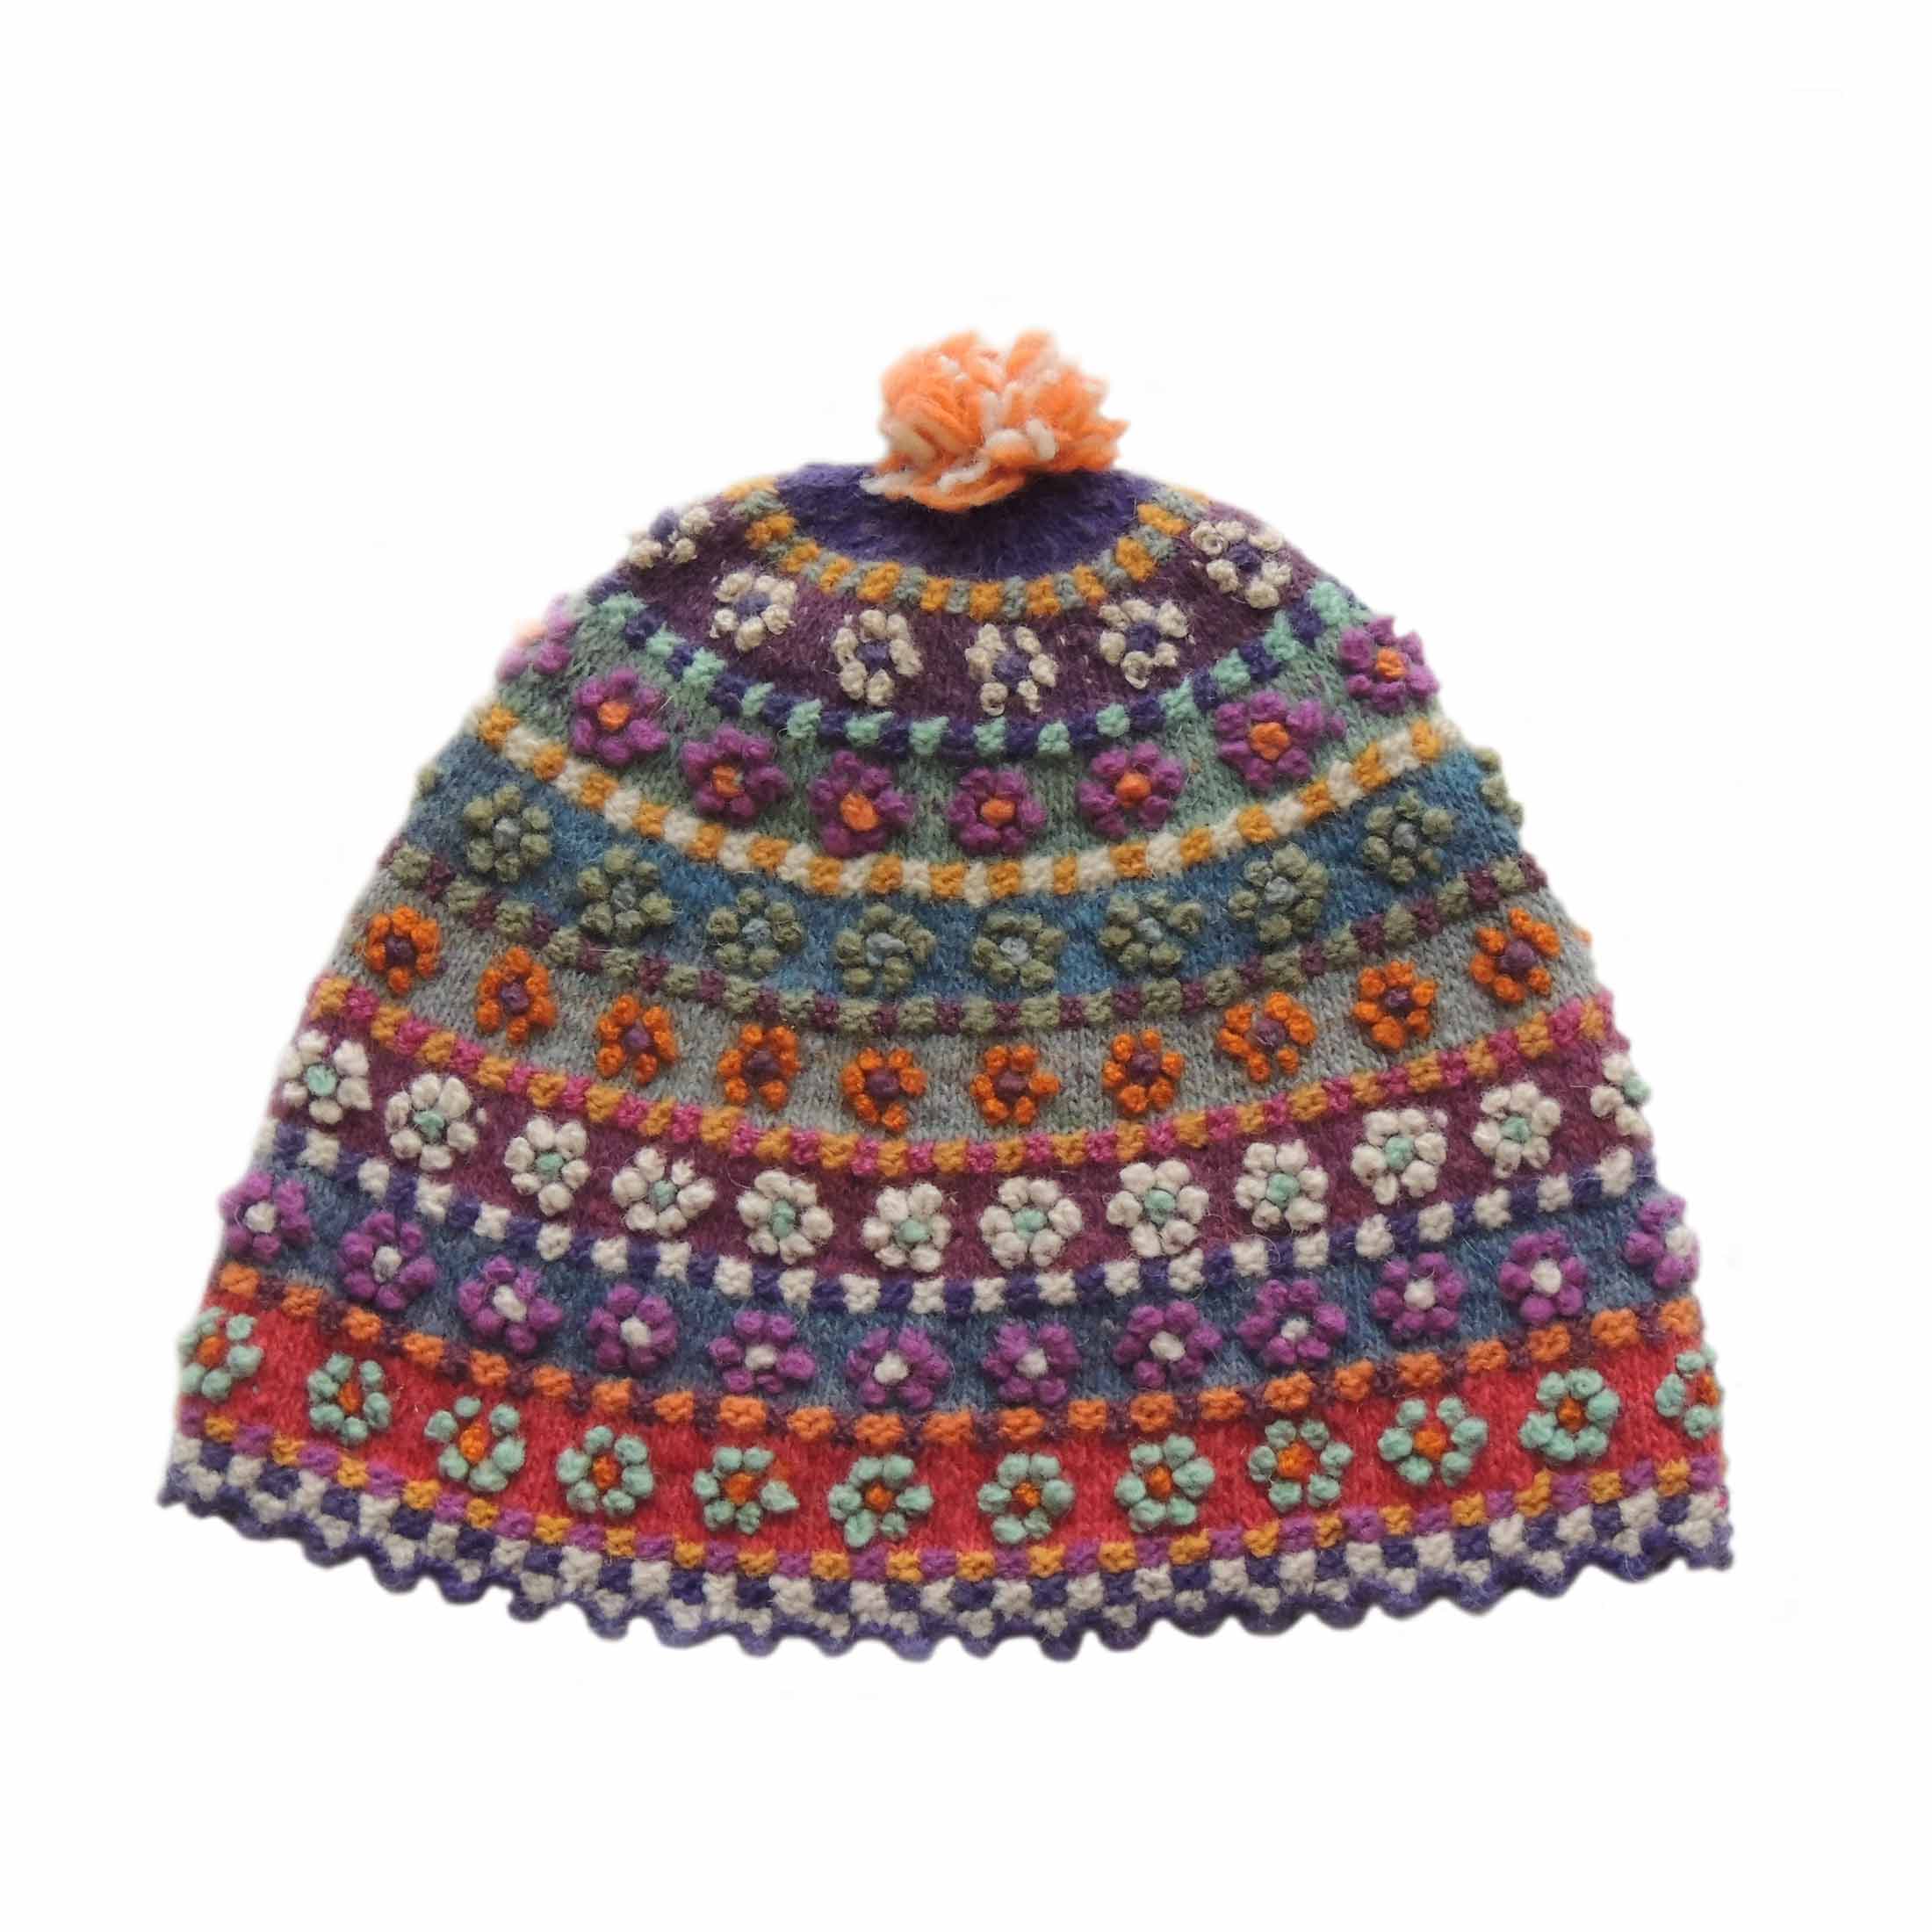 PopsFL wholesale producer Hand knitted womens colorful beanie - hat made of natural dyed sheepswool.